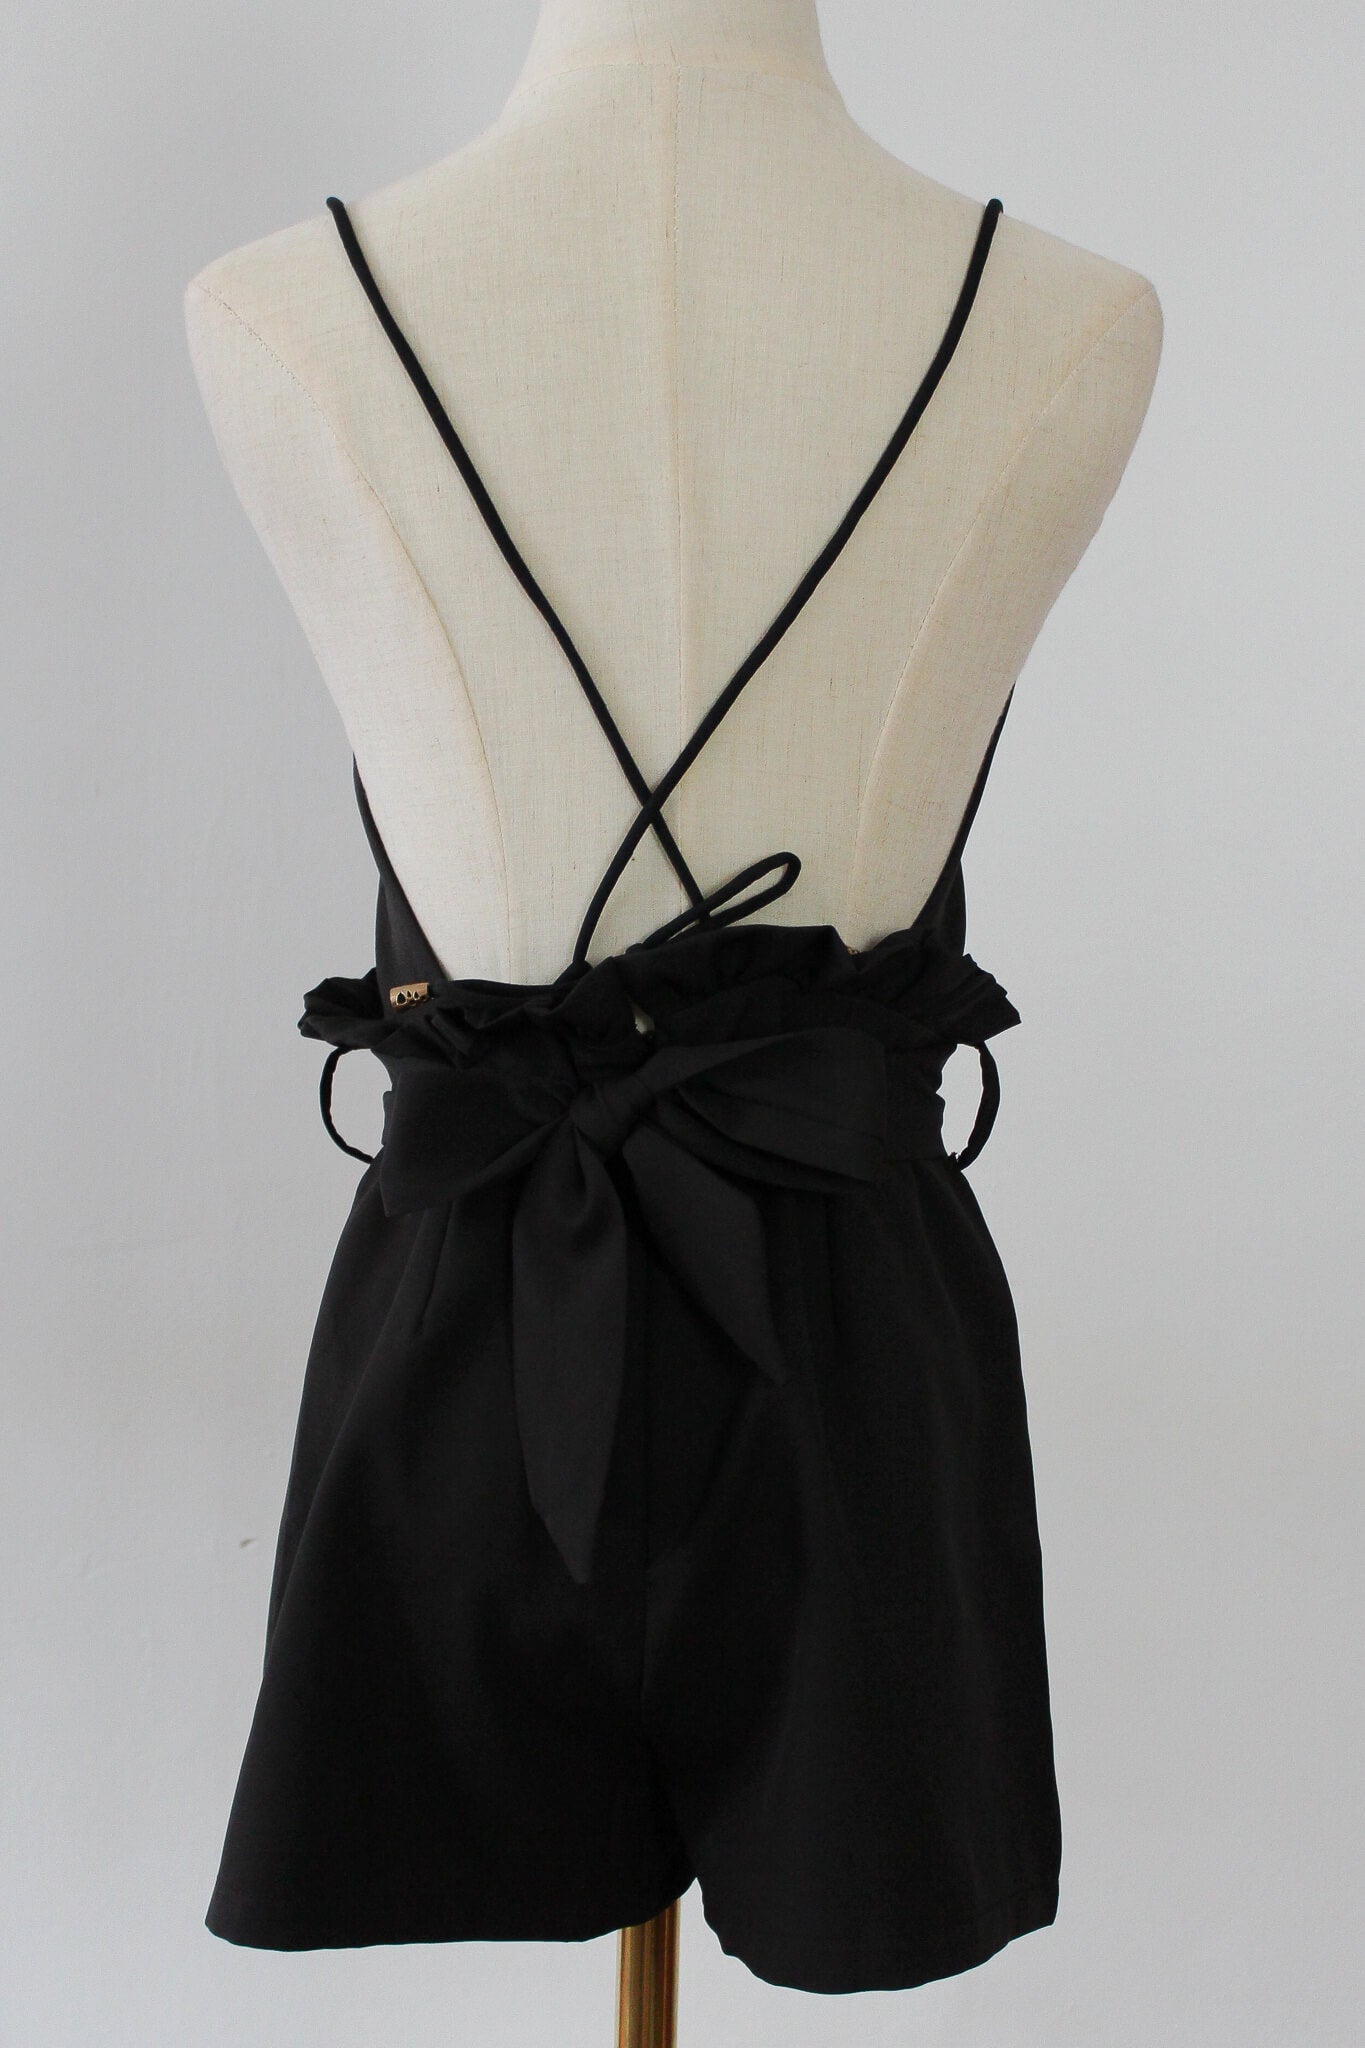 Backless Gathered Waist Belted Romper, perfect for summer